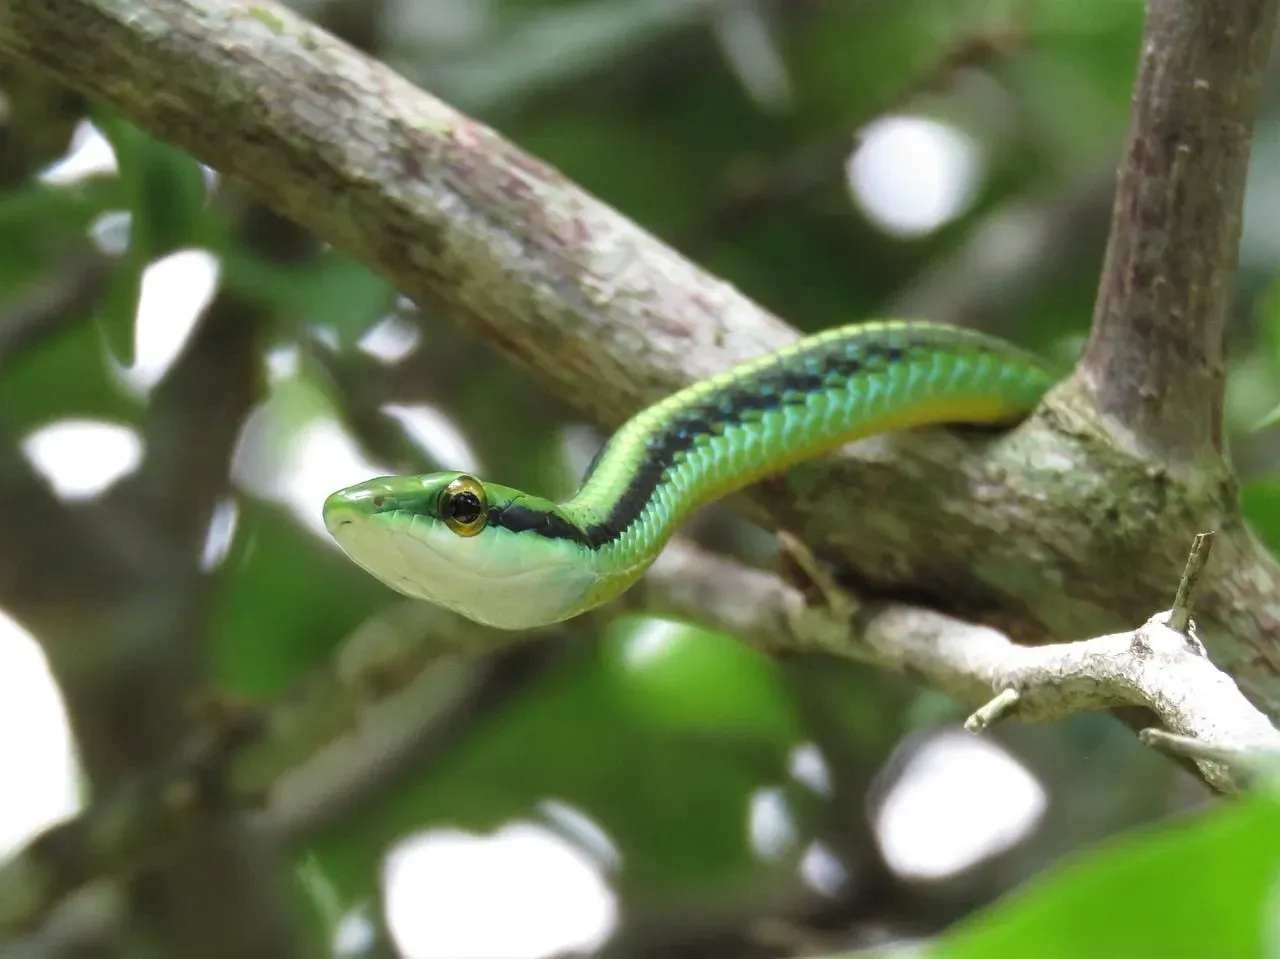 Learn all about vine snakes here.